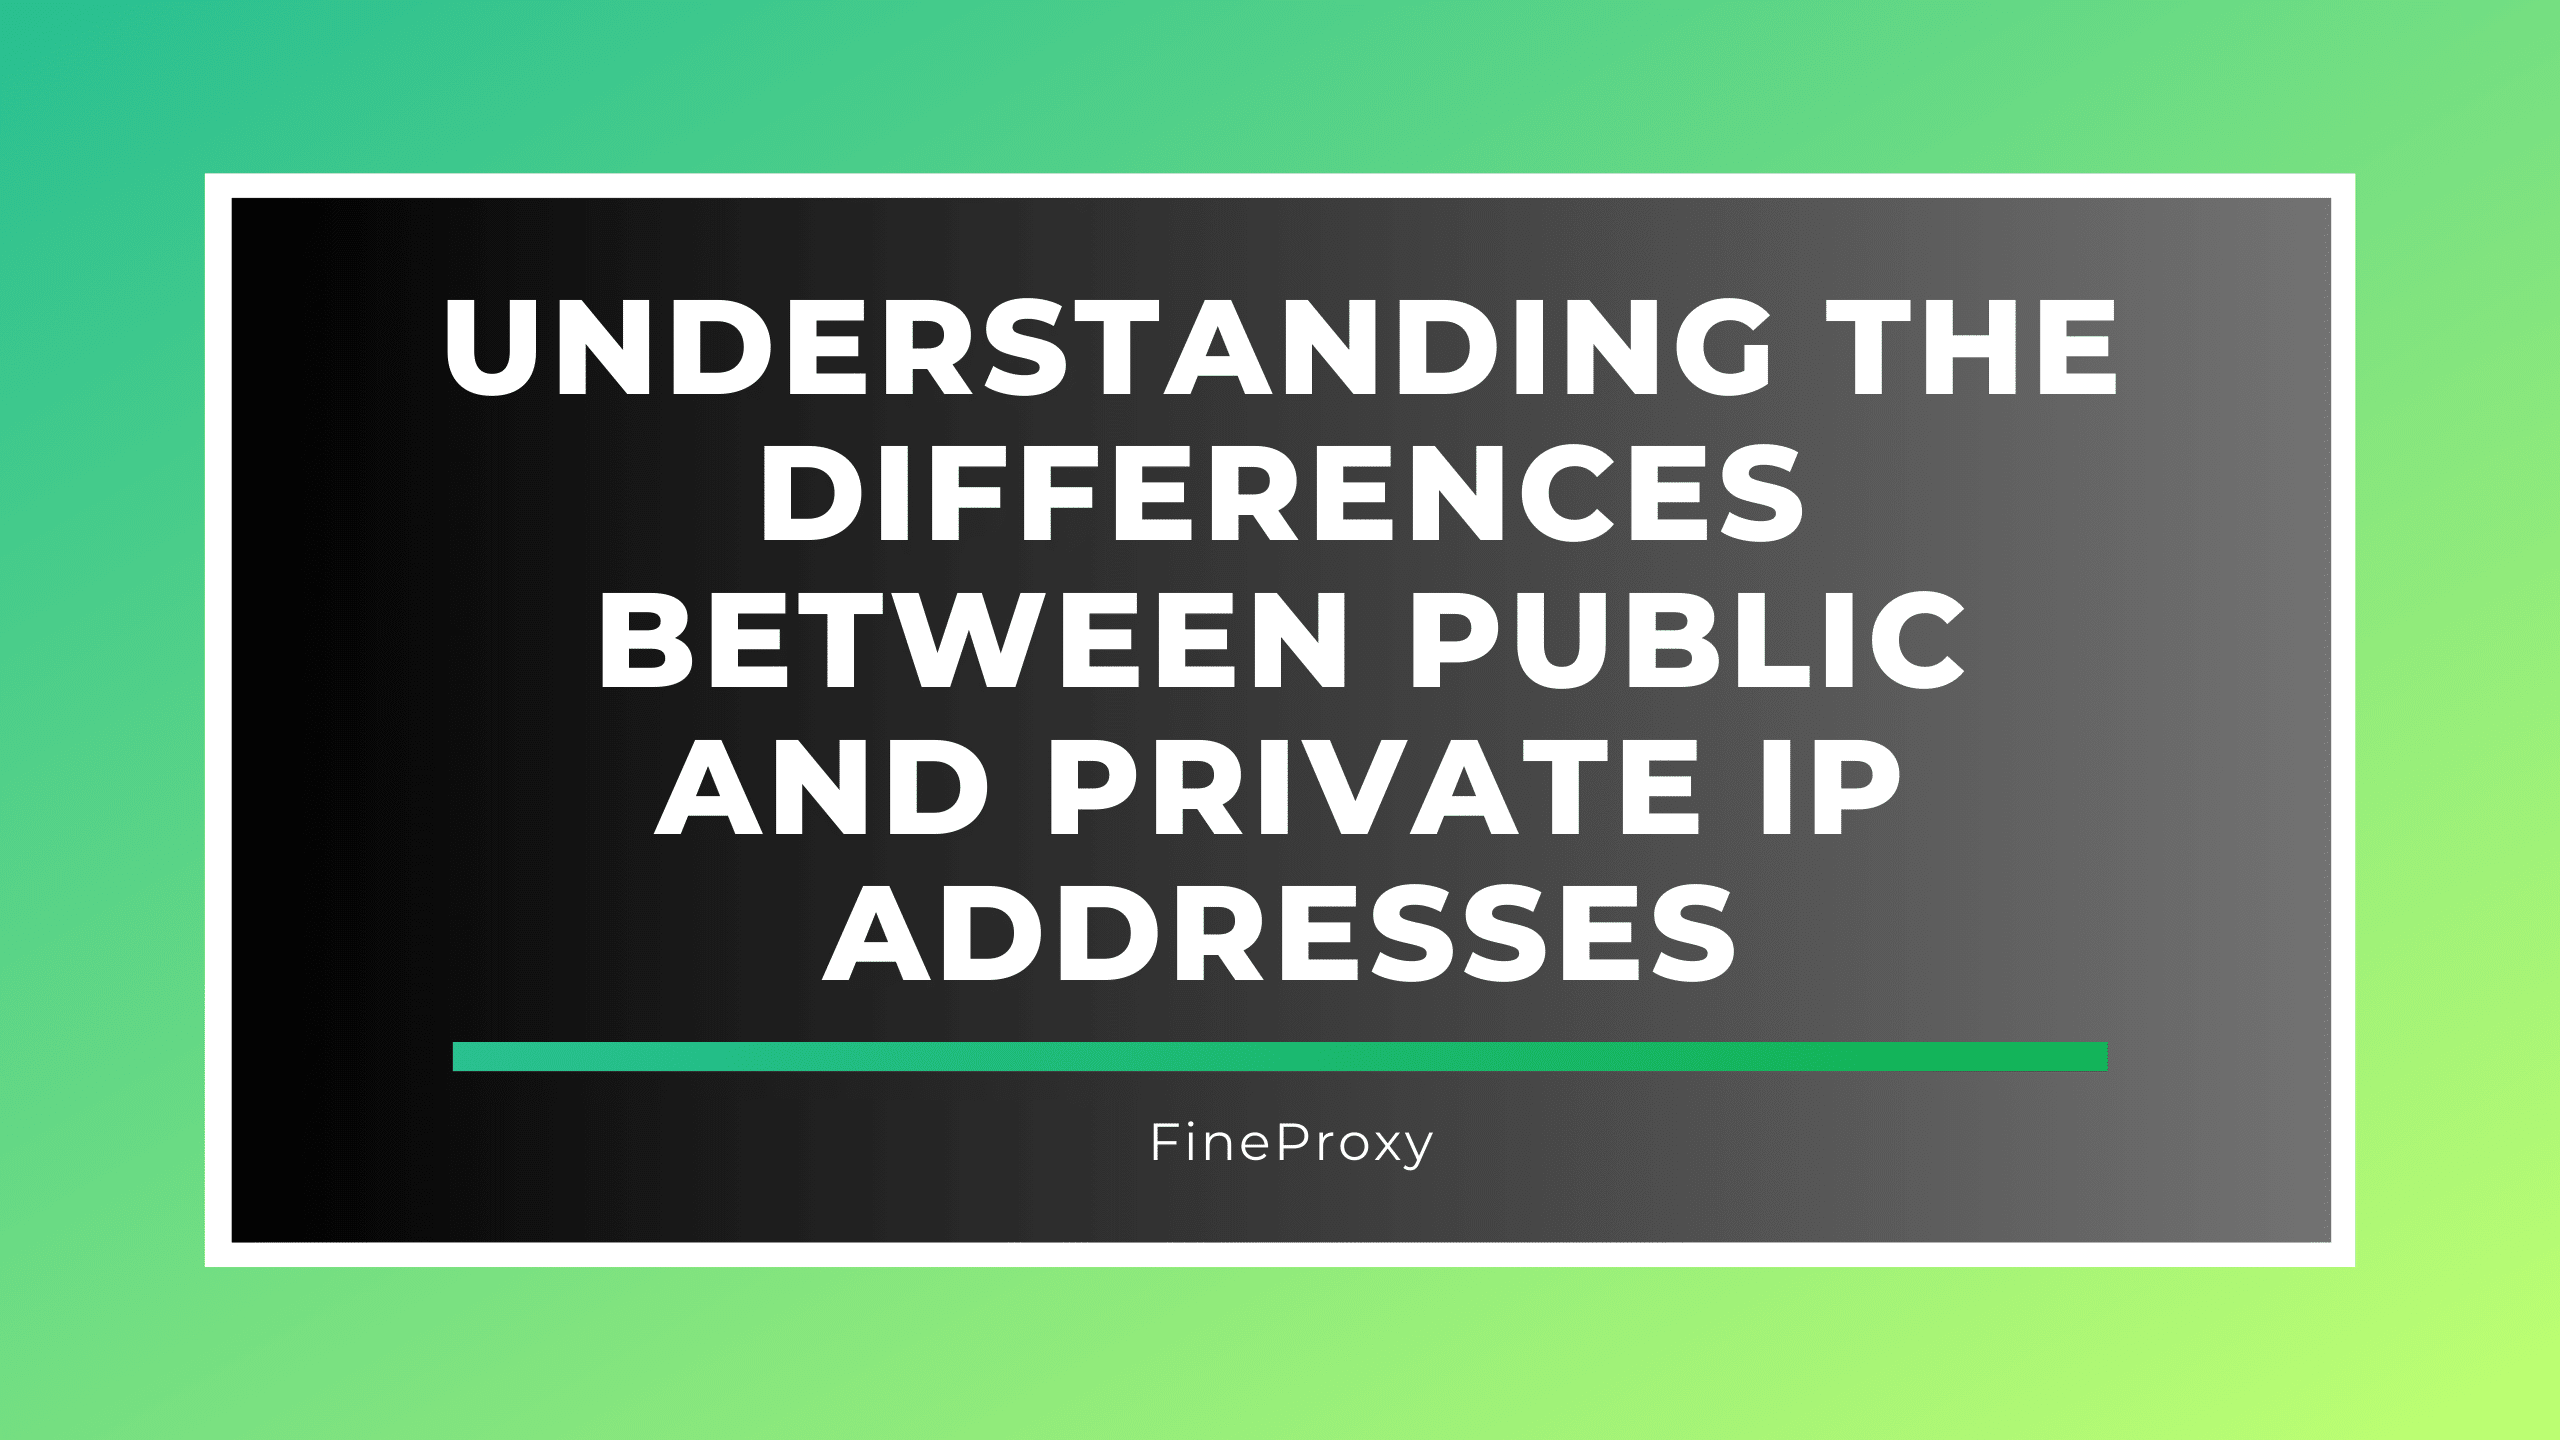 Understanding the Differences Between Public and Private IP Addresses